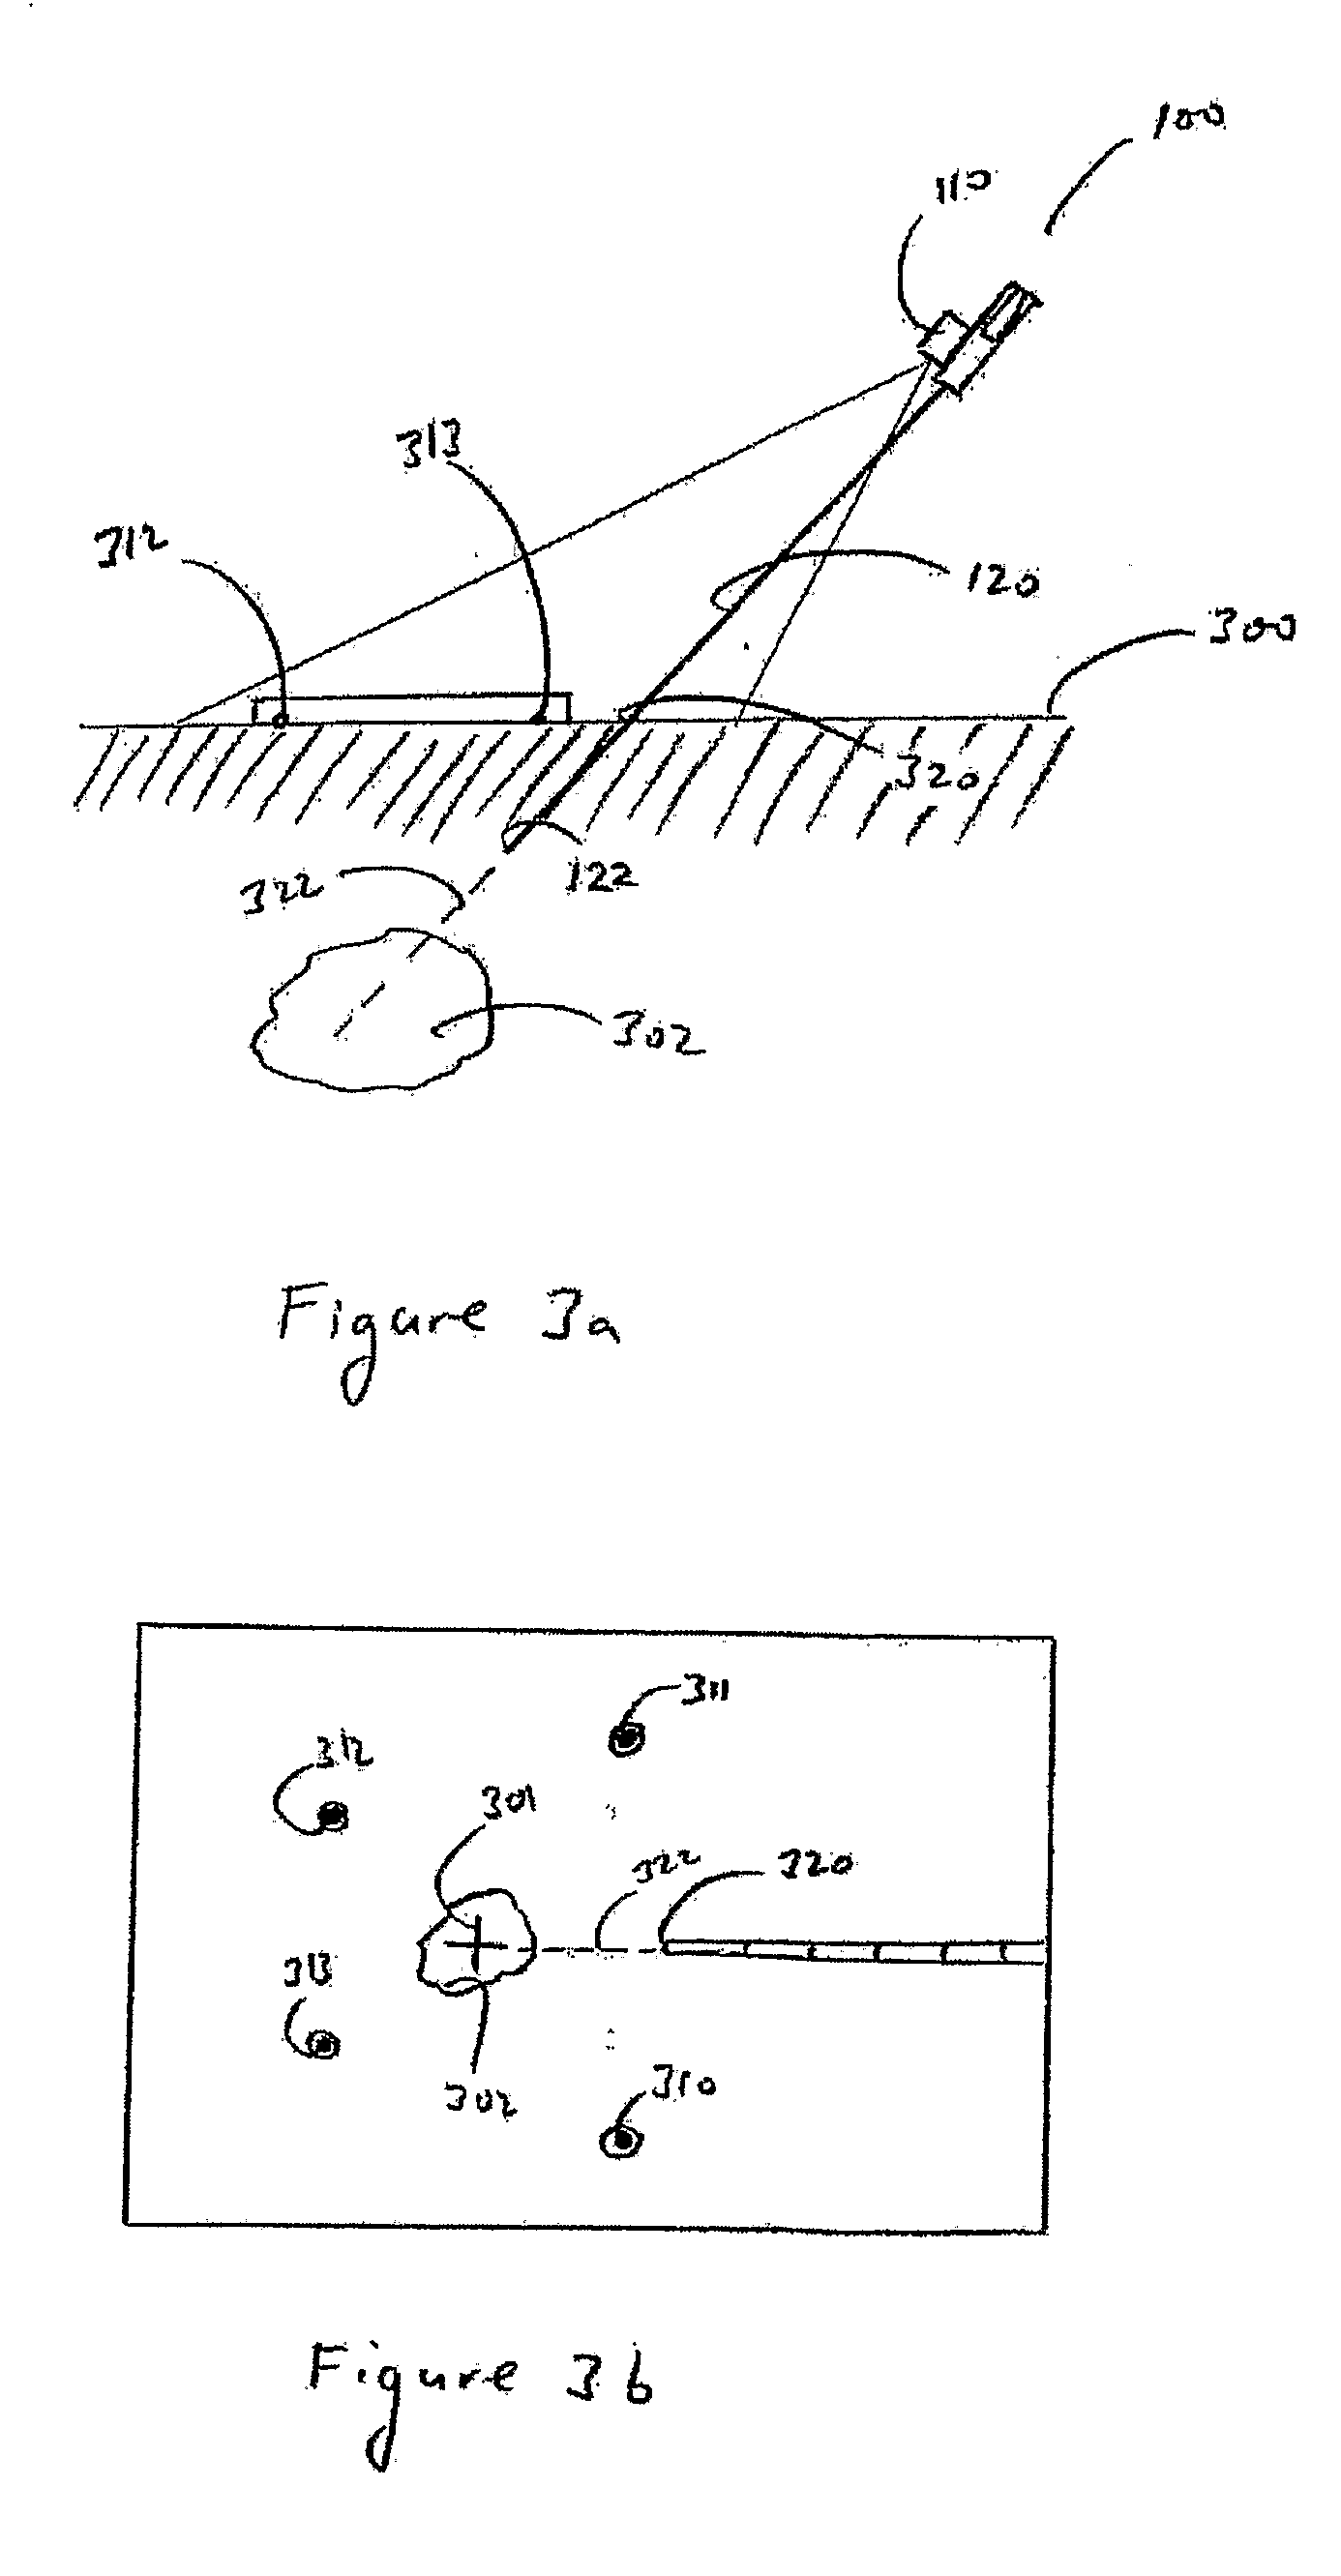 System and Method For Optical Position Measurement And Guidance Of A Rigid Or Semi-Flexible Tool To A Target